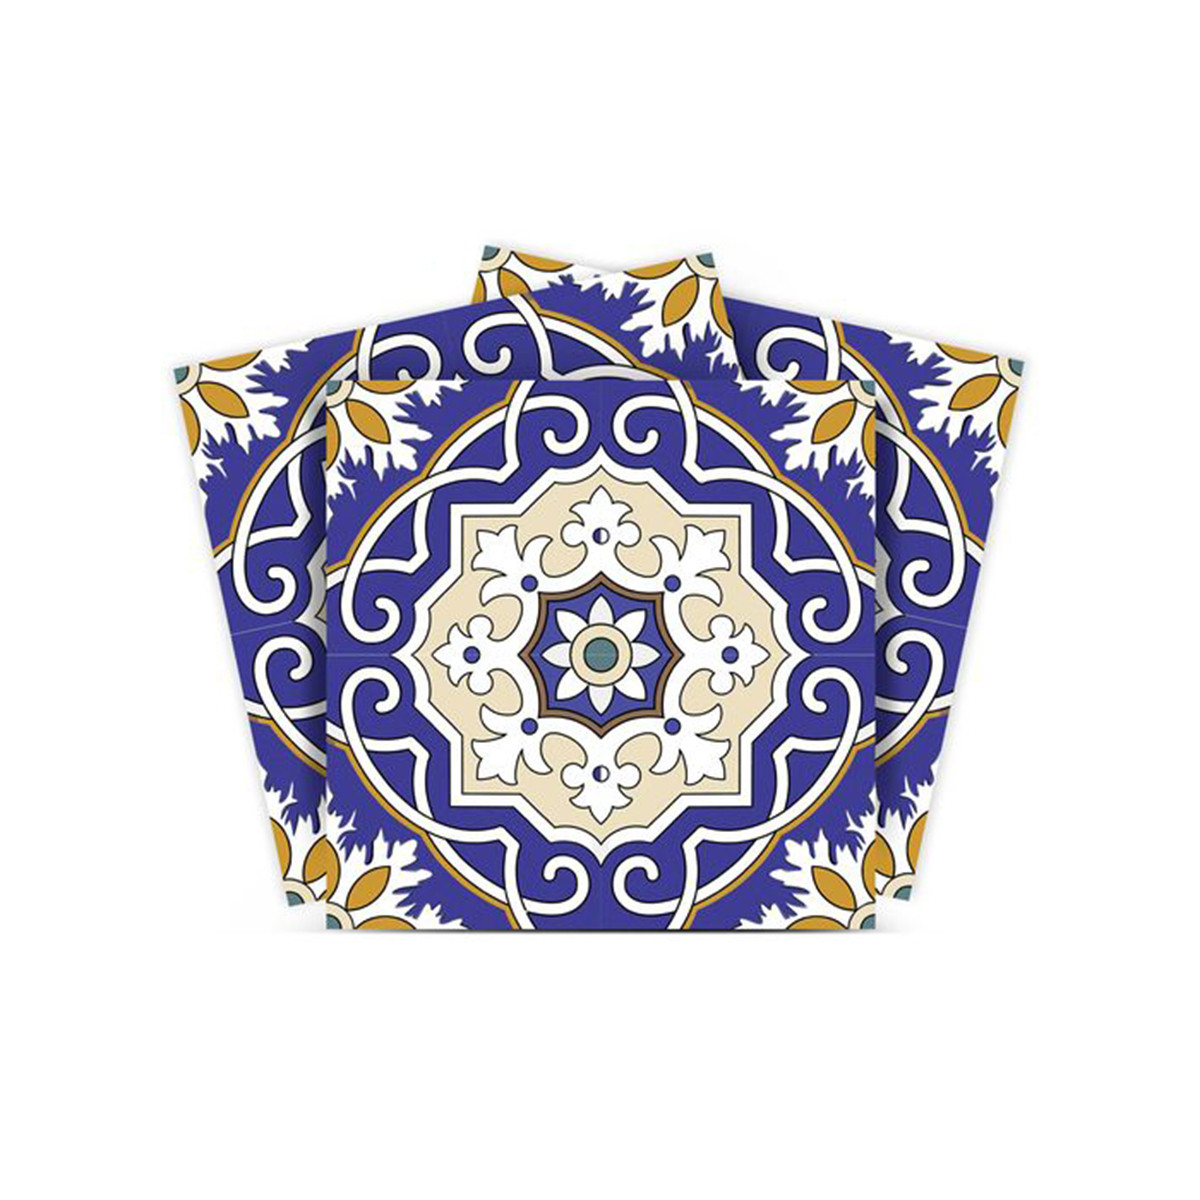 5" X 5" Blue White and Gold Mosaic Removable Tiles-399831-1